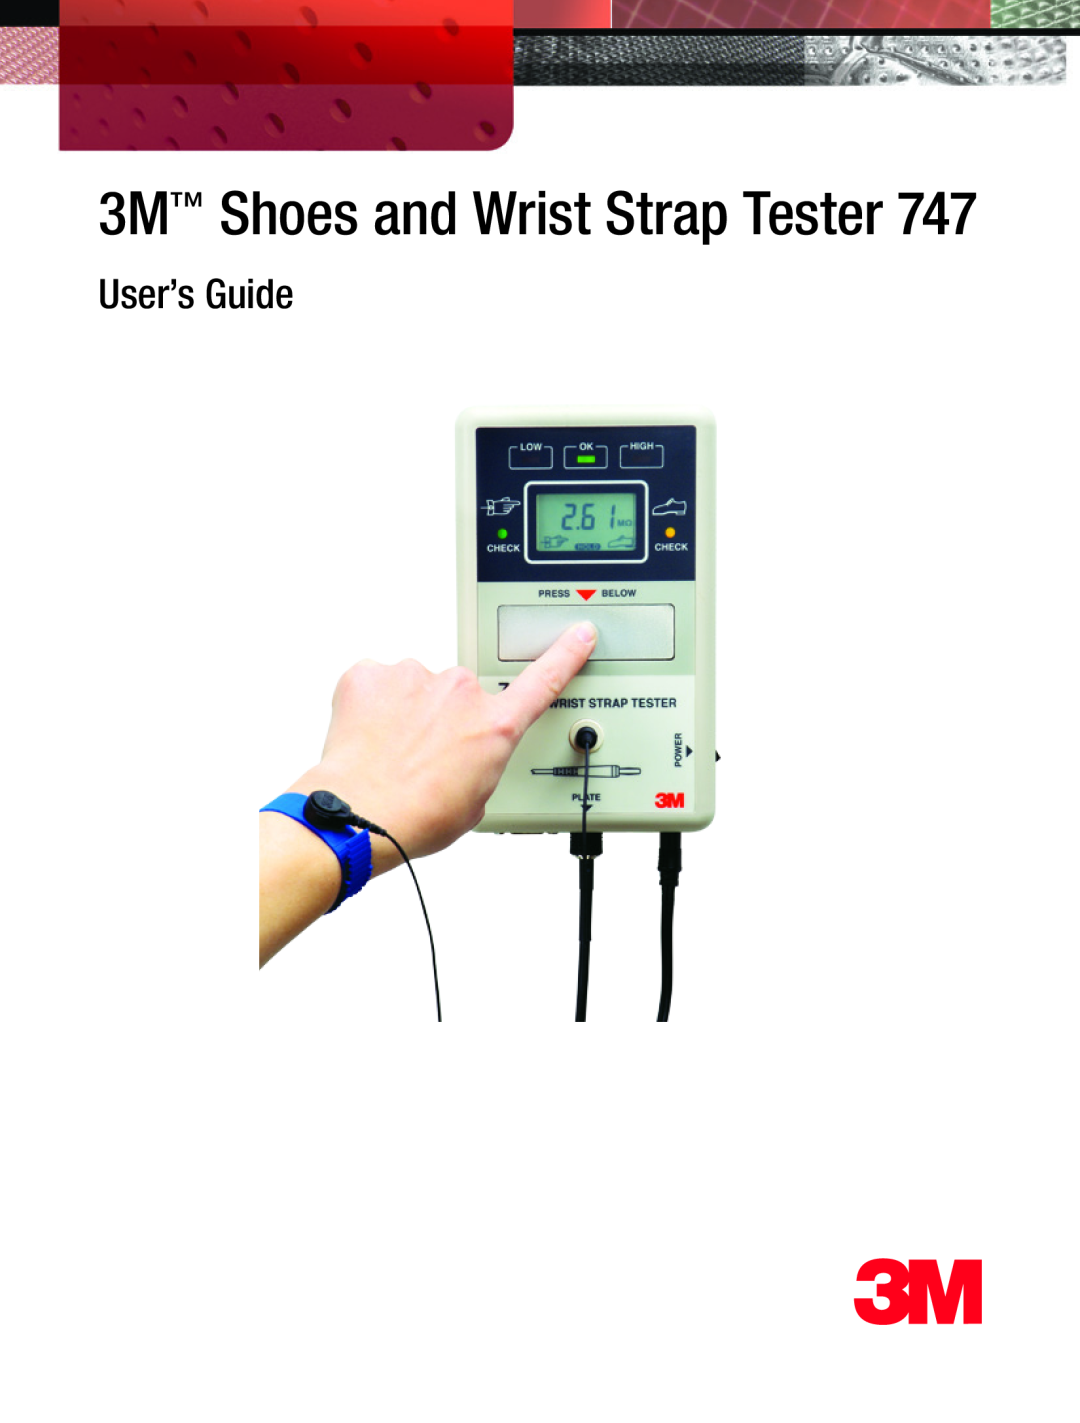 3M 747 manual 3M Shoes and Wrist Strap Tester, User’s Guide 